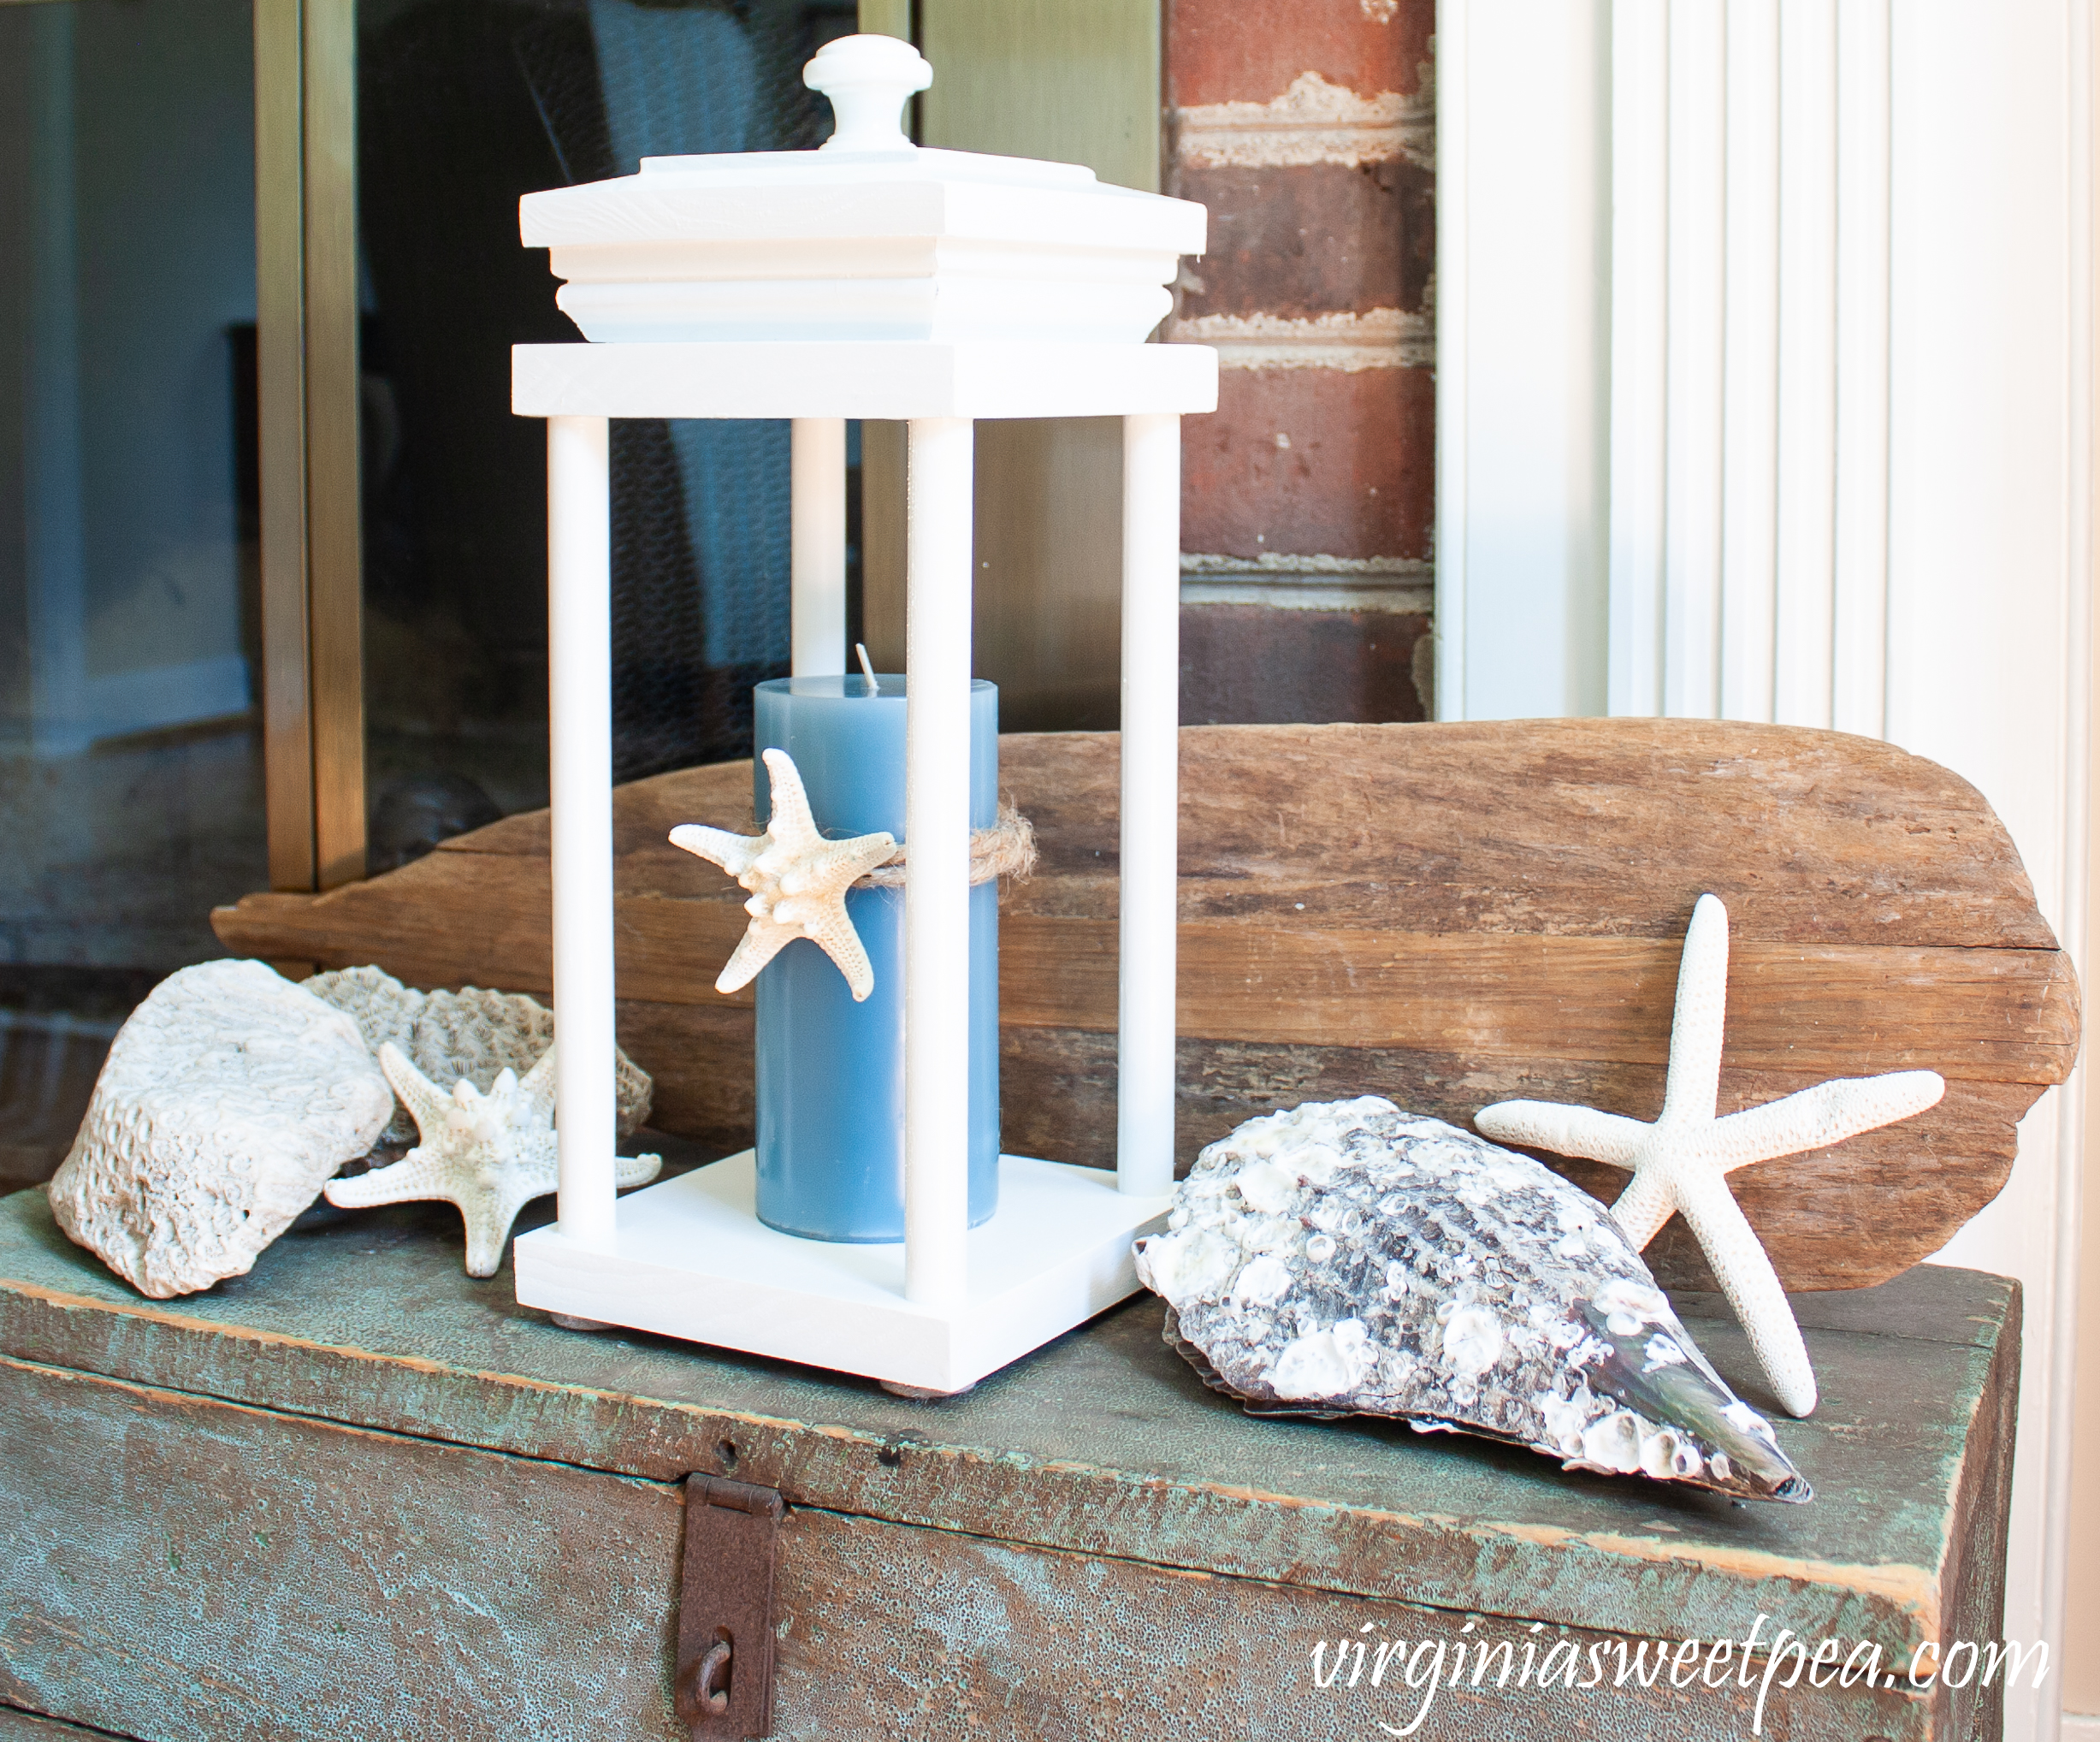 Coastal themed summer vignette with a lantern, shells, coral, and an old wooden oar.